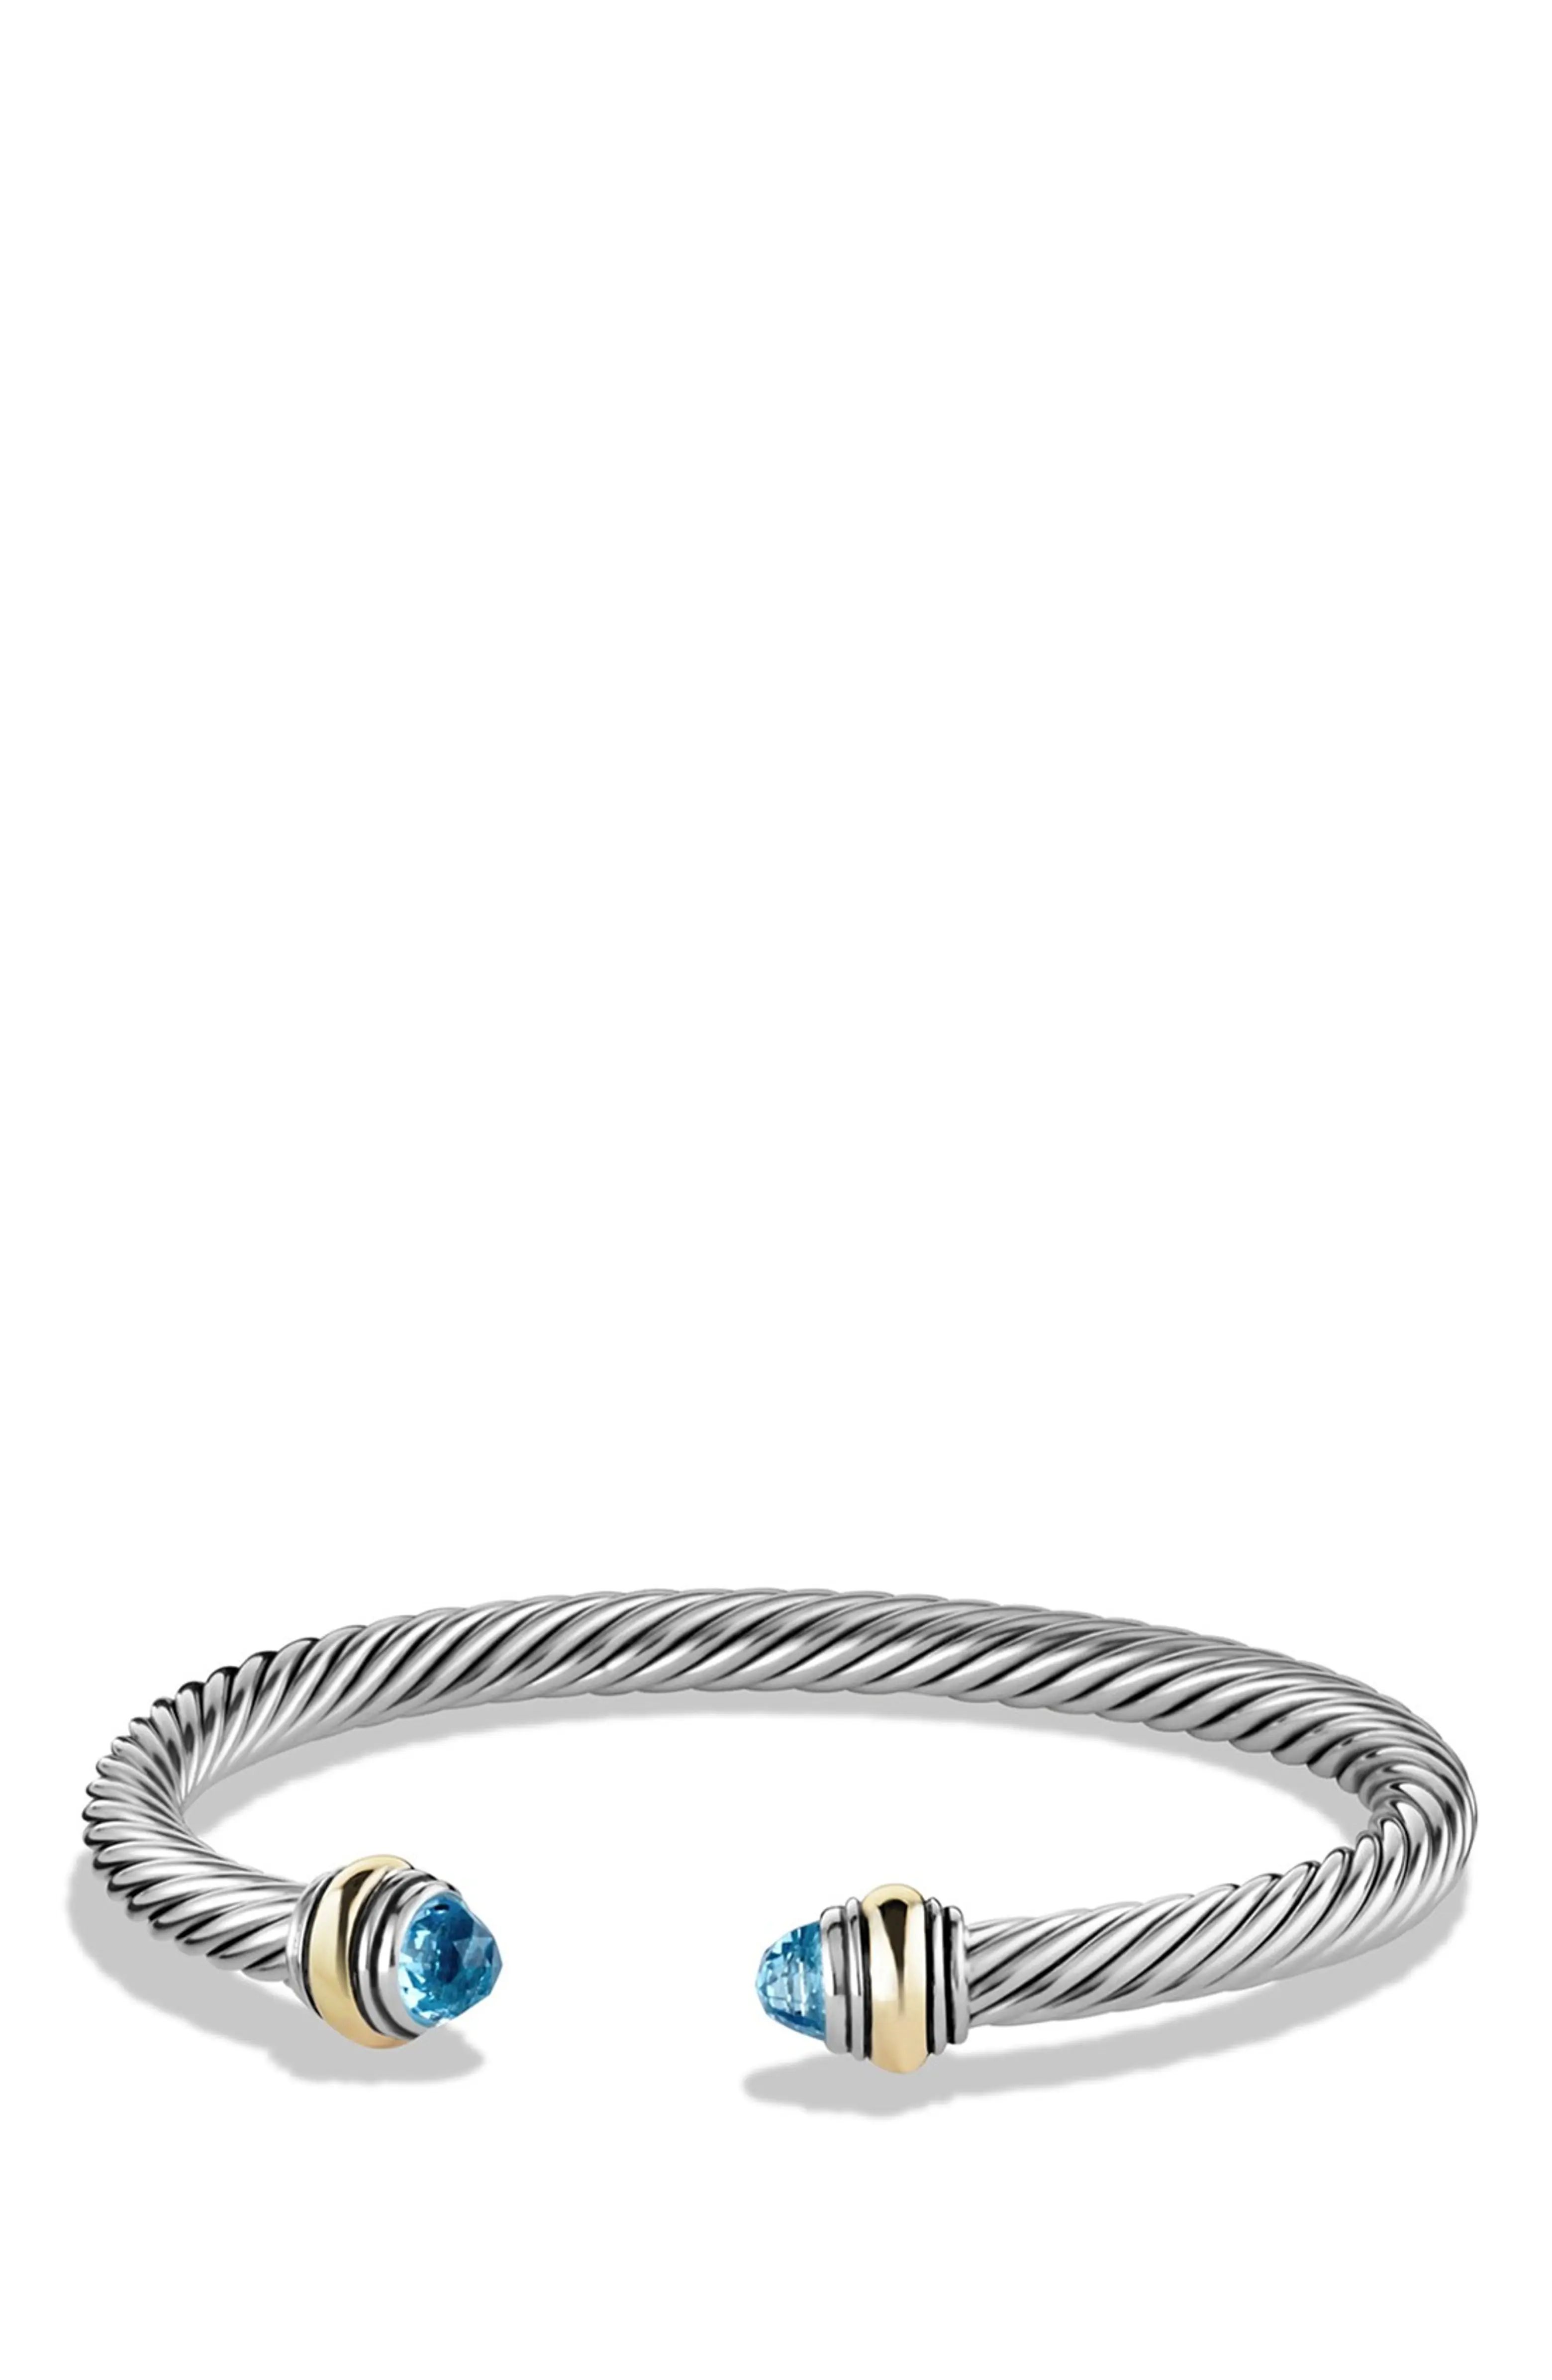 Cable Classics Bracelet with Semiprecious Stones & 14K Gold Accent, 5mm | Nordstrom